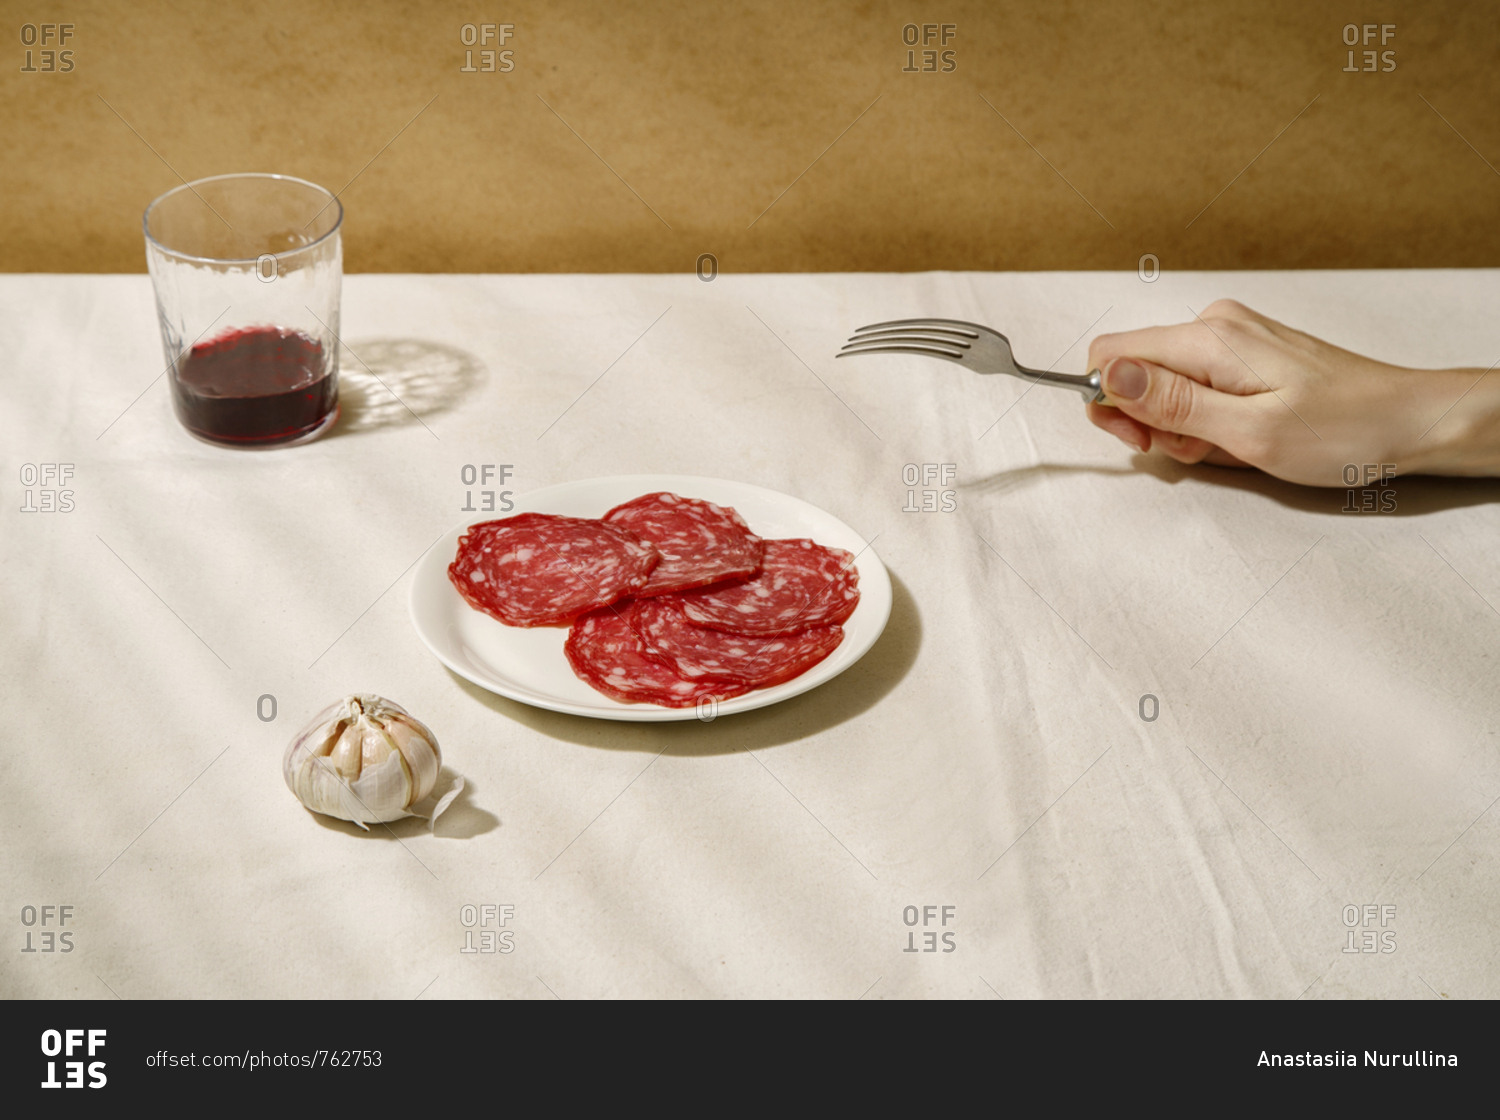 Minimalistic composition with salami slices on a white plate, garlic, a glass of wine and female hand holding fork